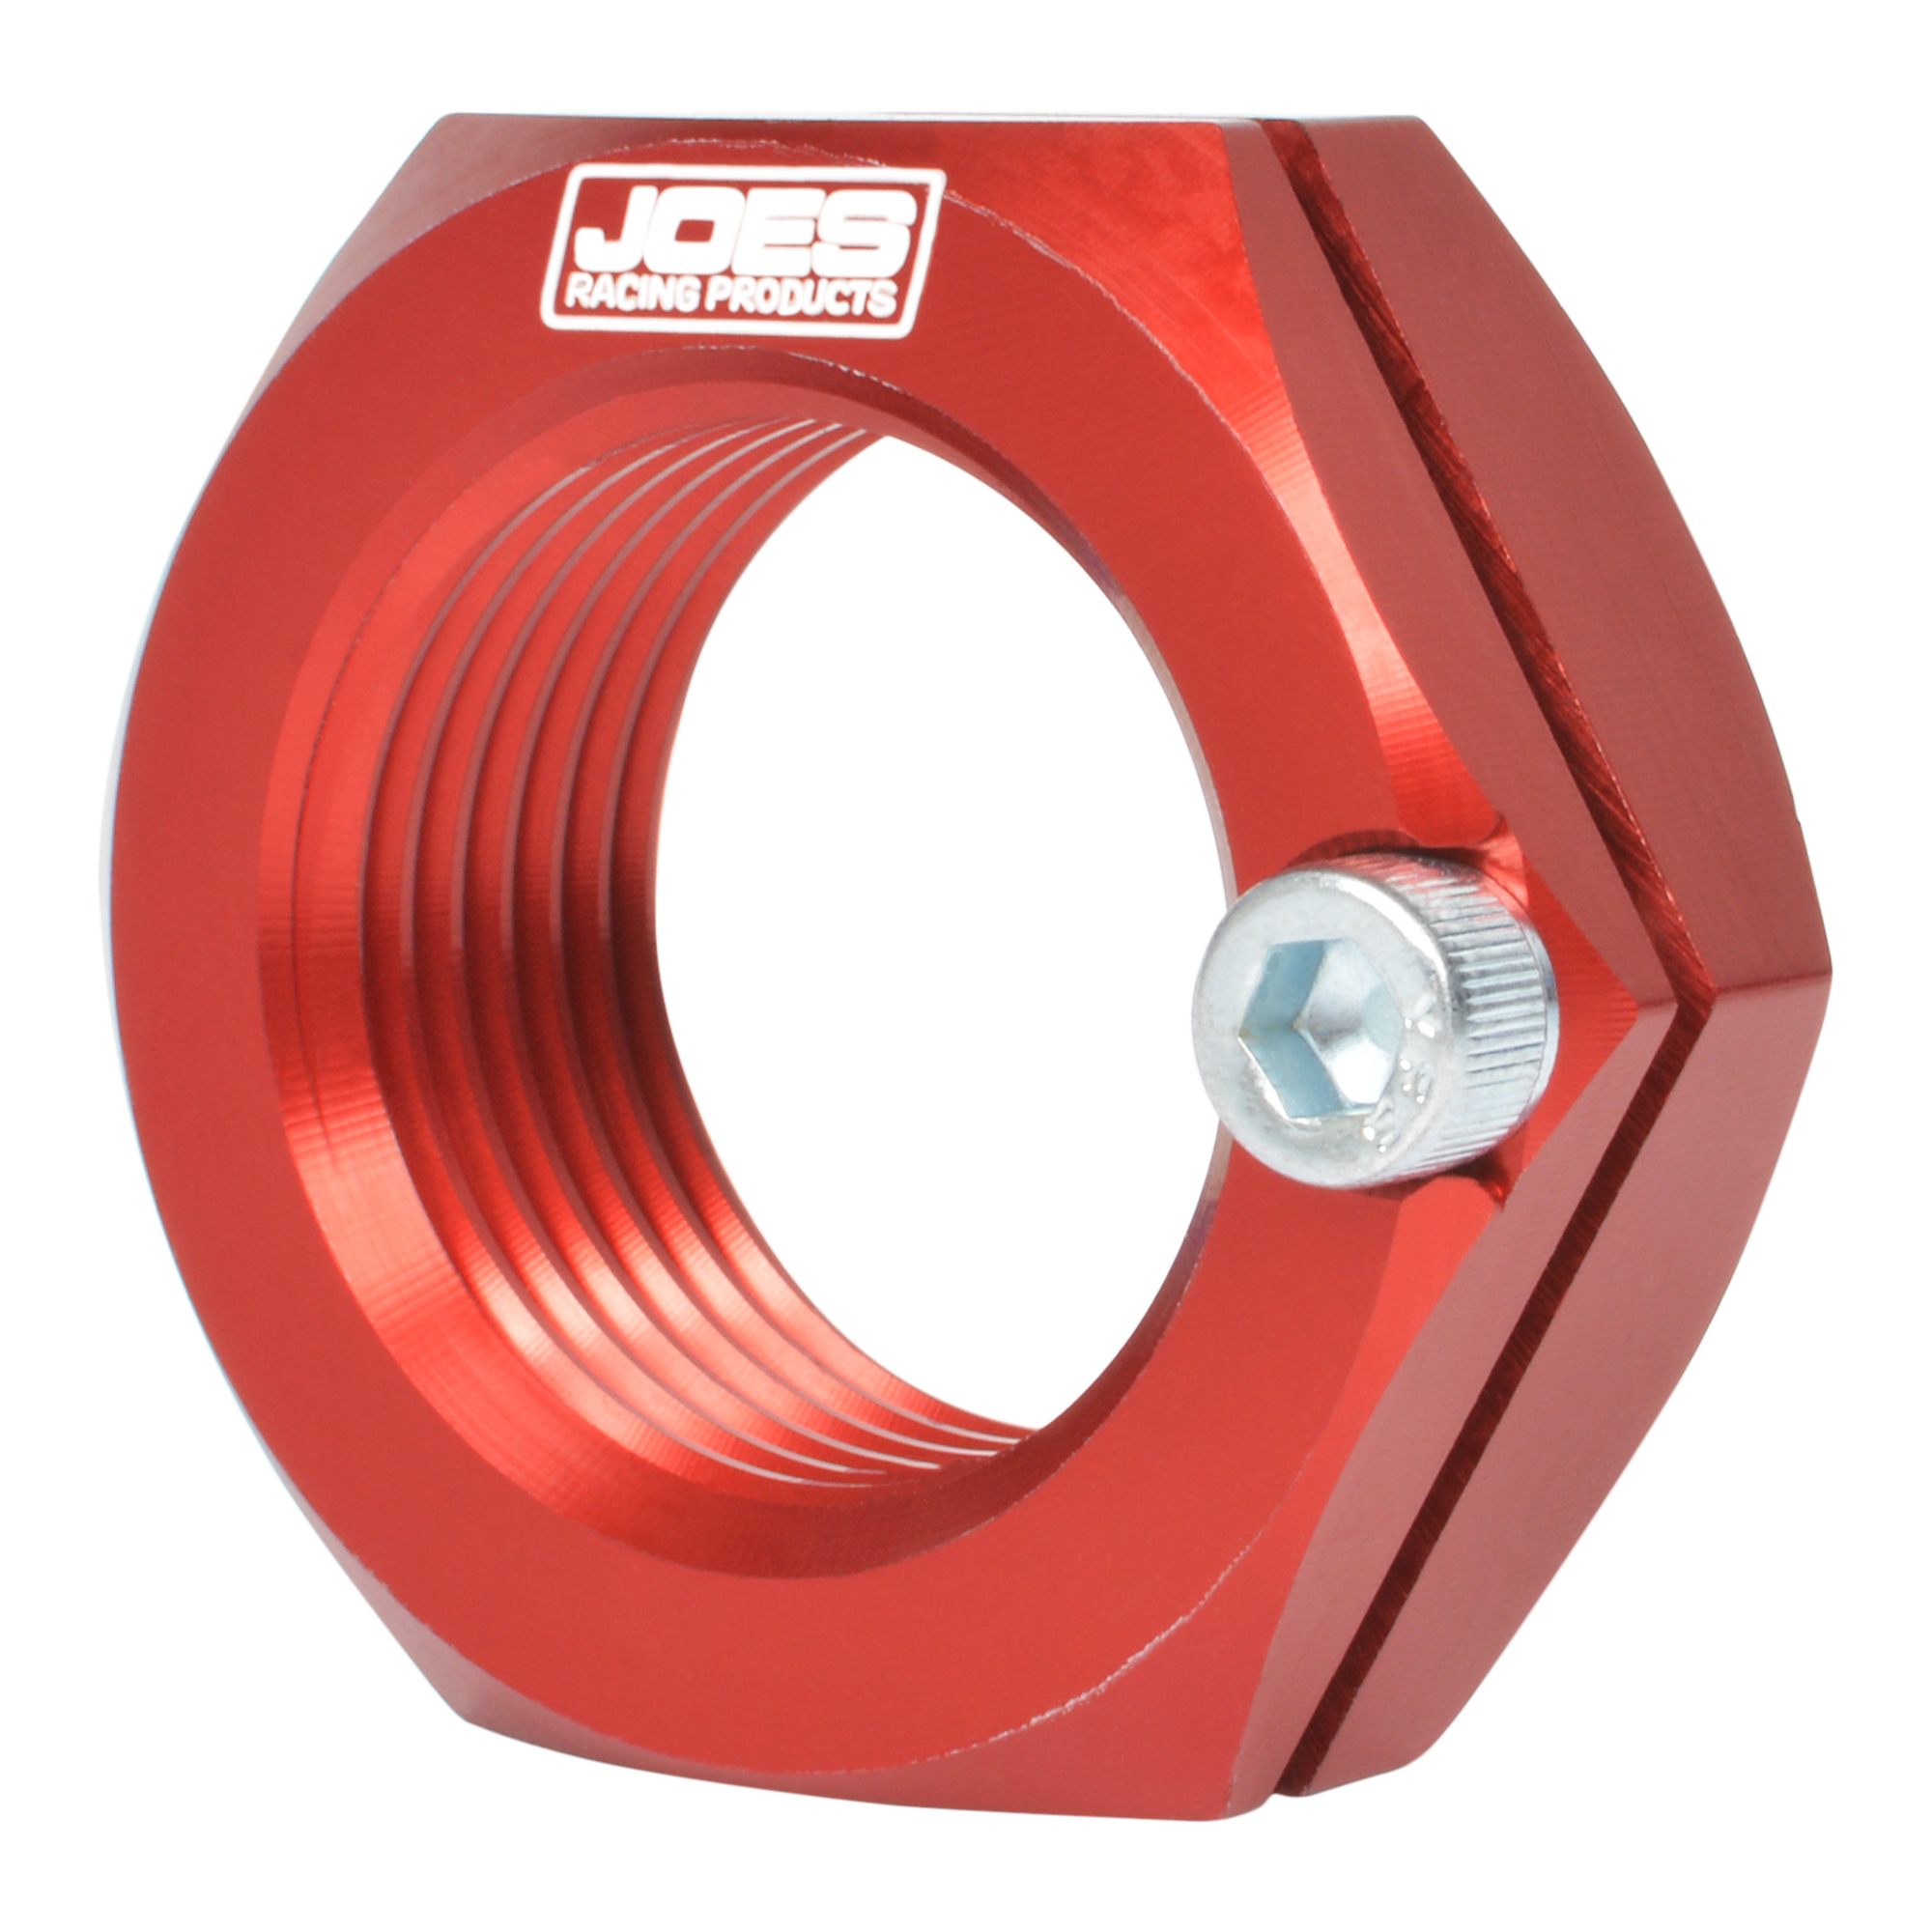 JOES Micro Sprint Front Spindle Split Nut